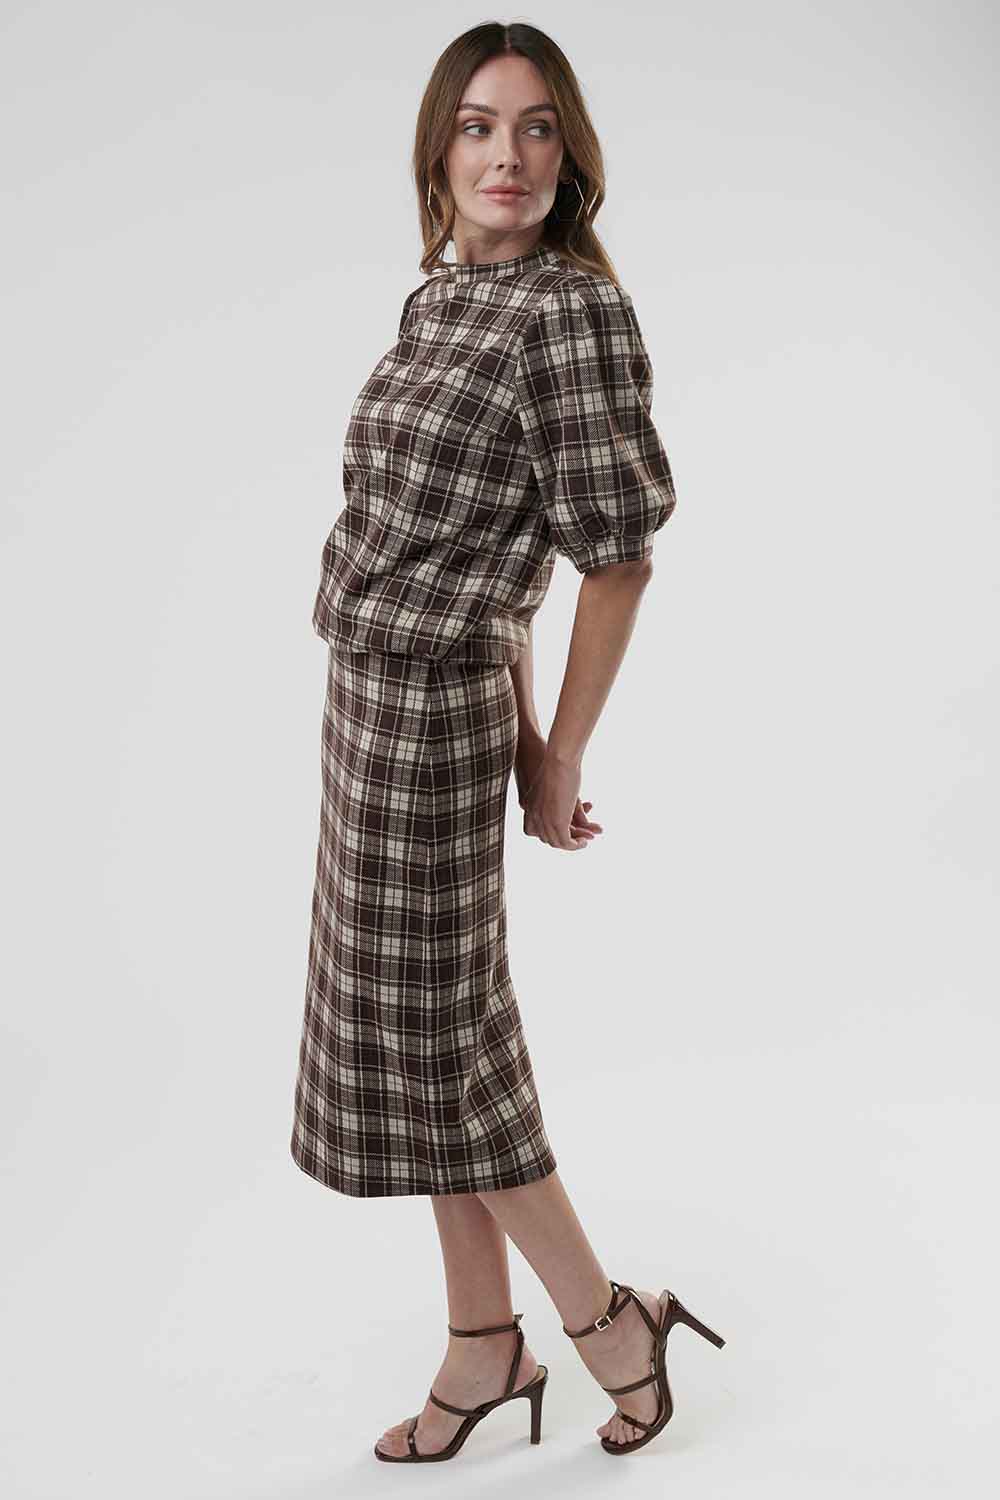 Style Puff Sleeves Plaid Top-Brown